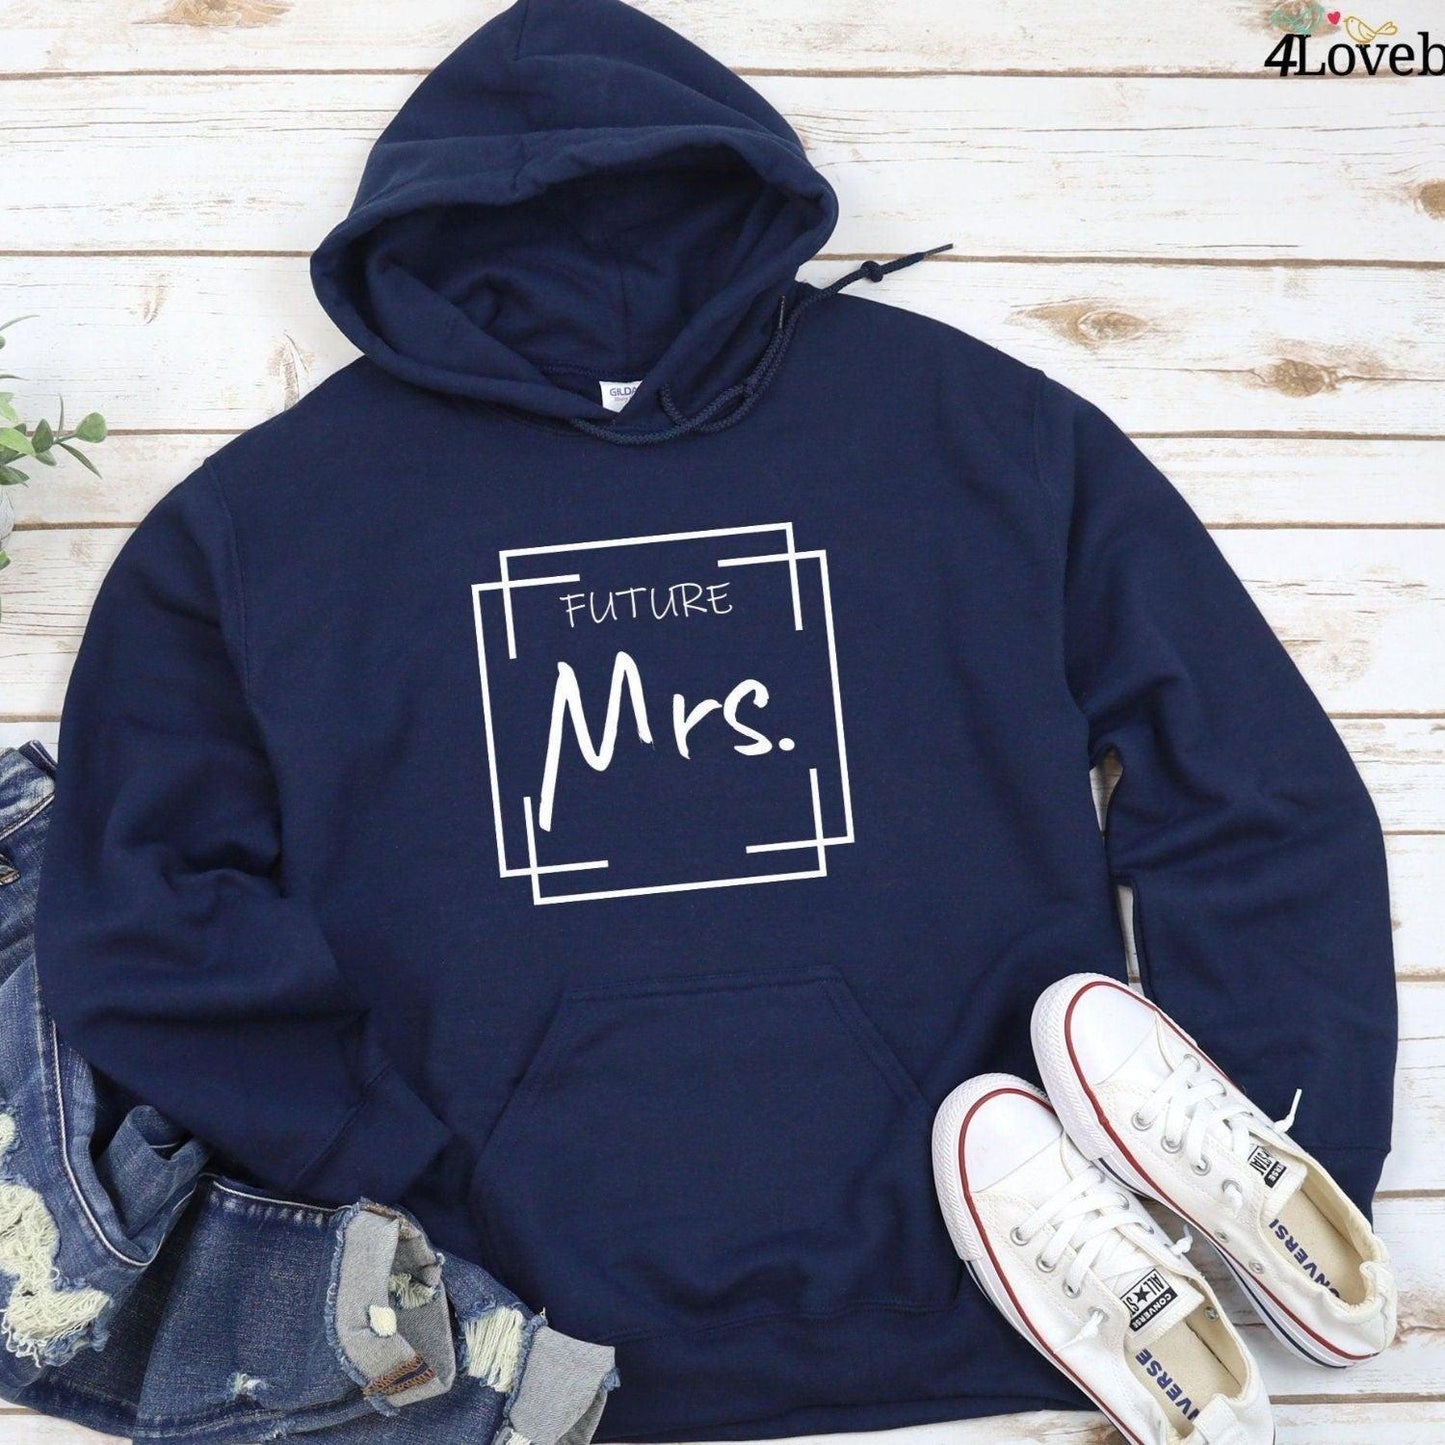 Future Mr & Mrs Cozy Matching Outfits Set - Perfect Couple's Gift Idea - 4Lovebirds